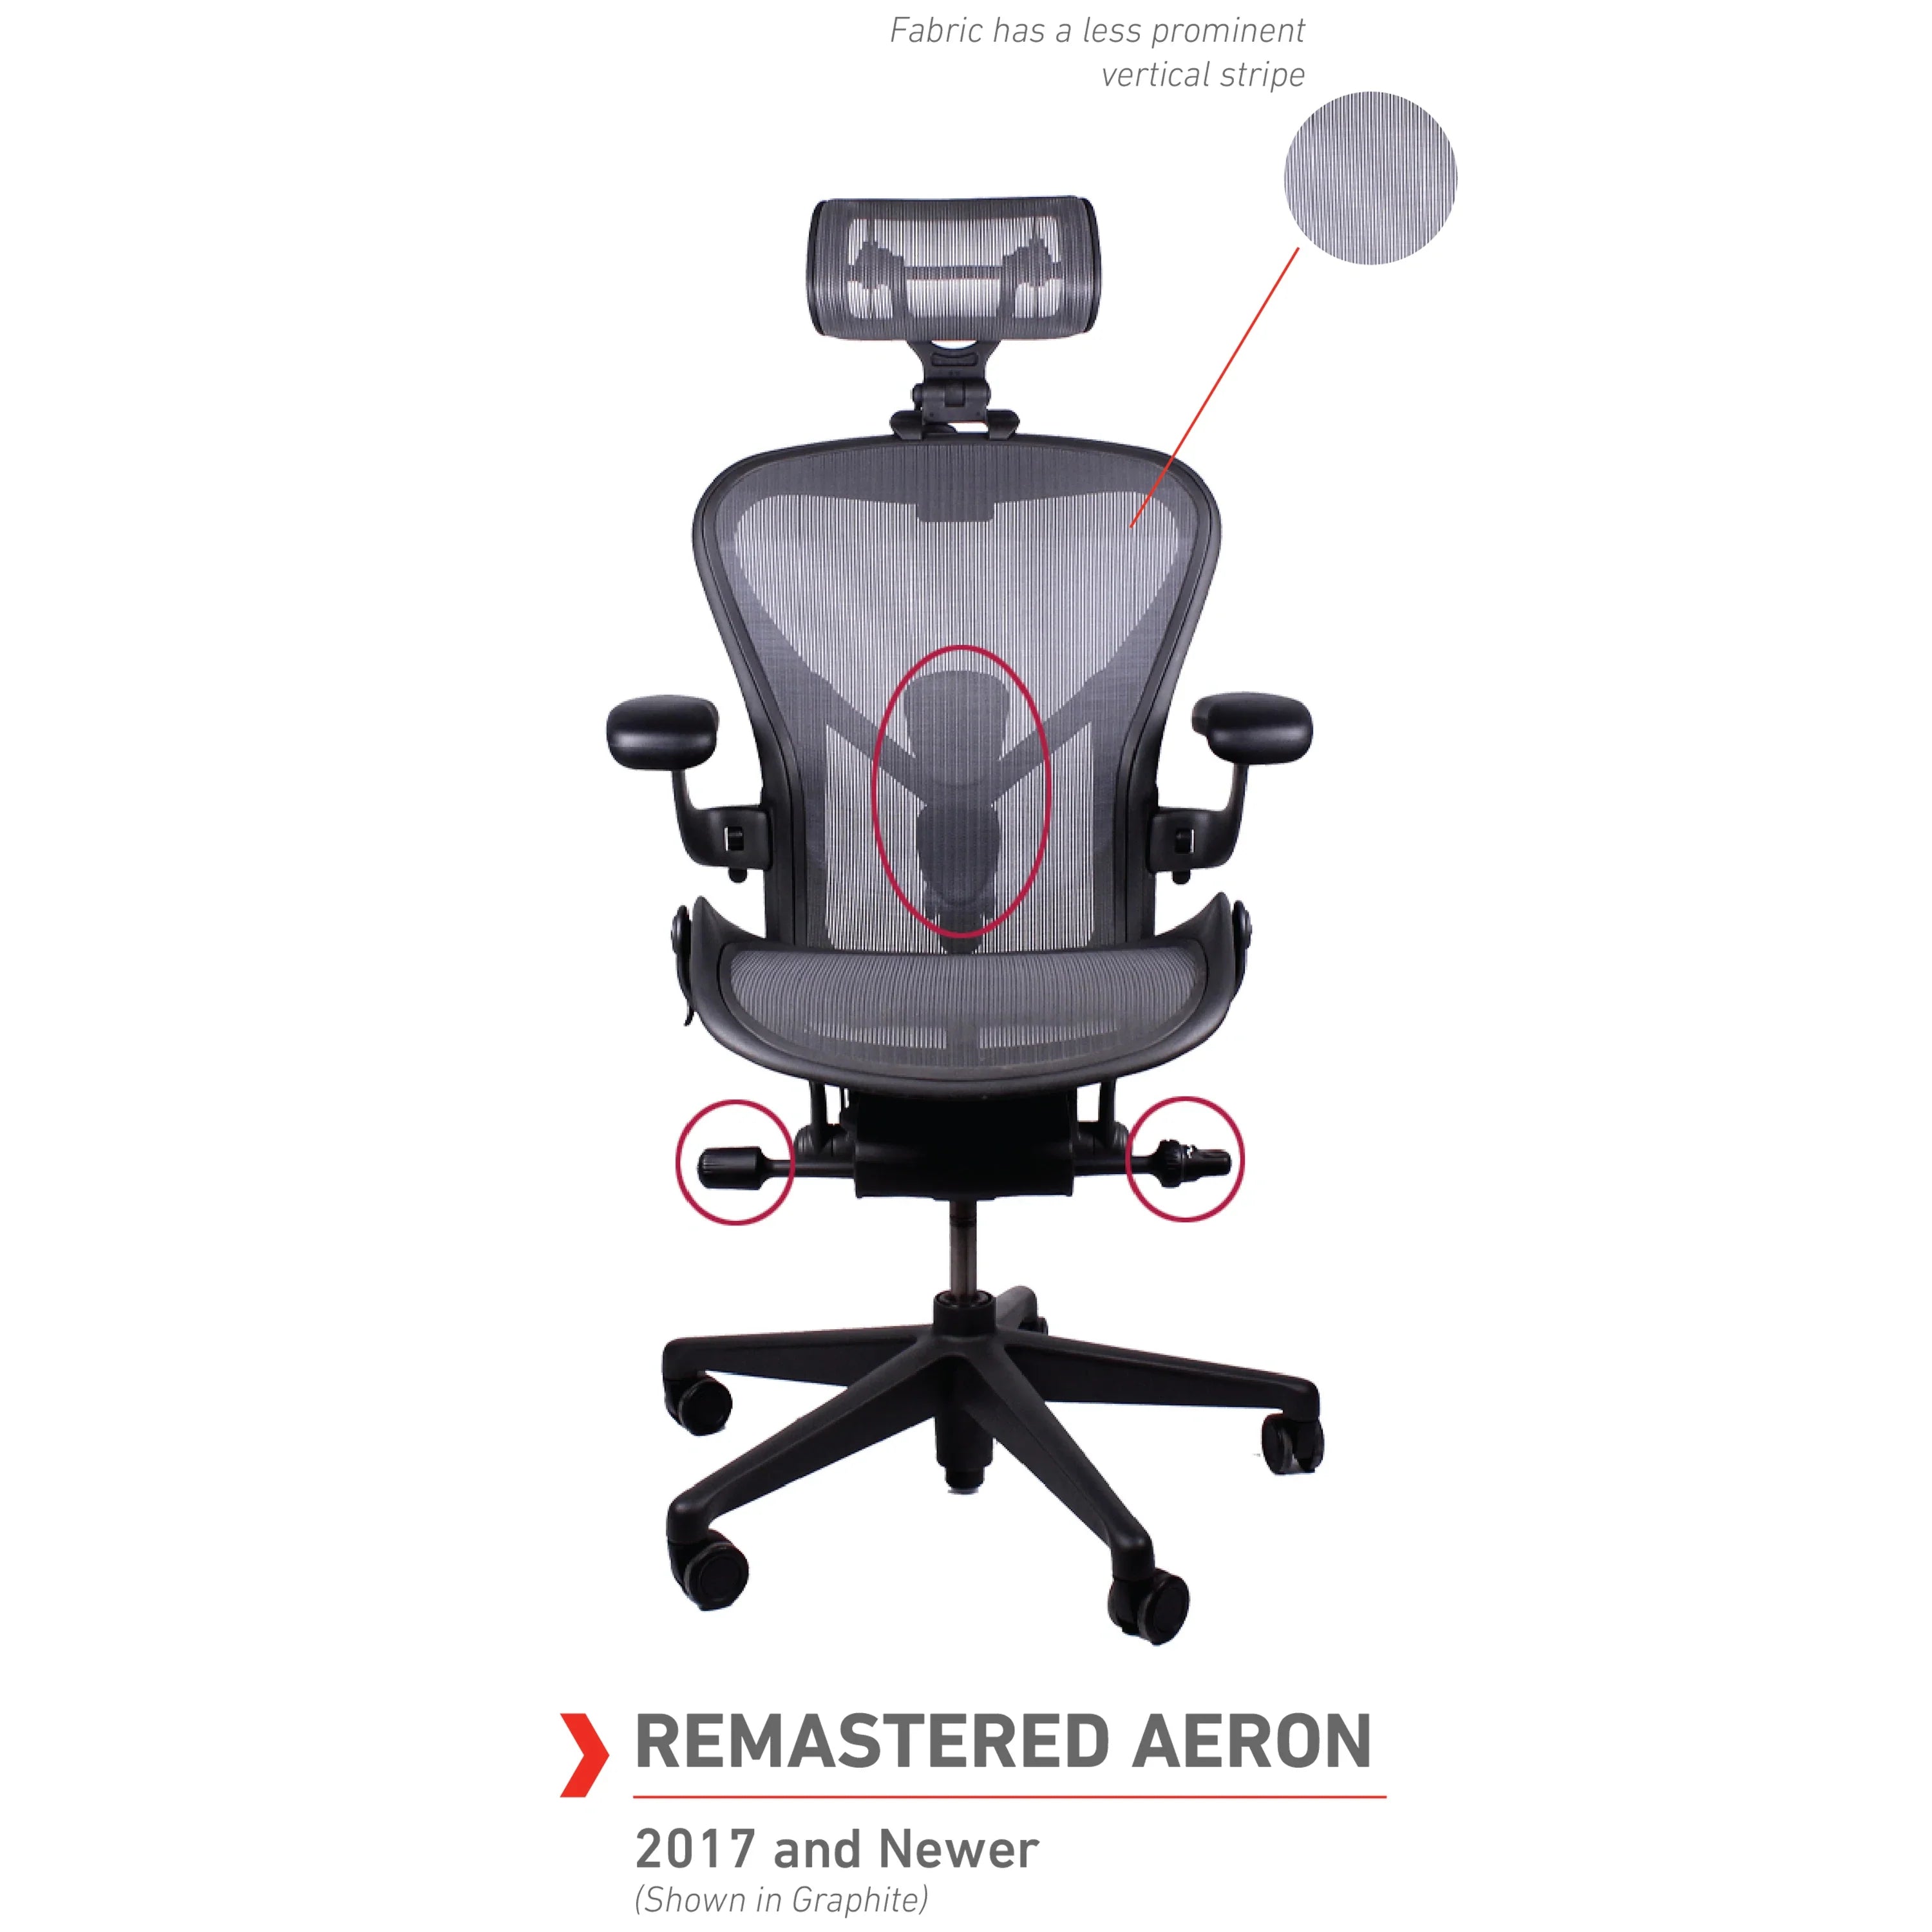 Herman Miller Aeron - Size: A - w/ Headrest for Users 5' 10 and Over